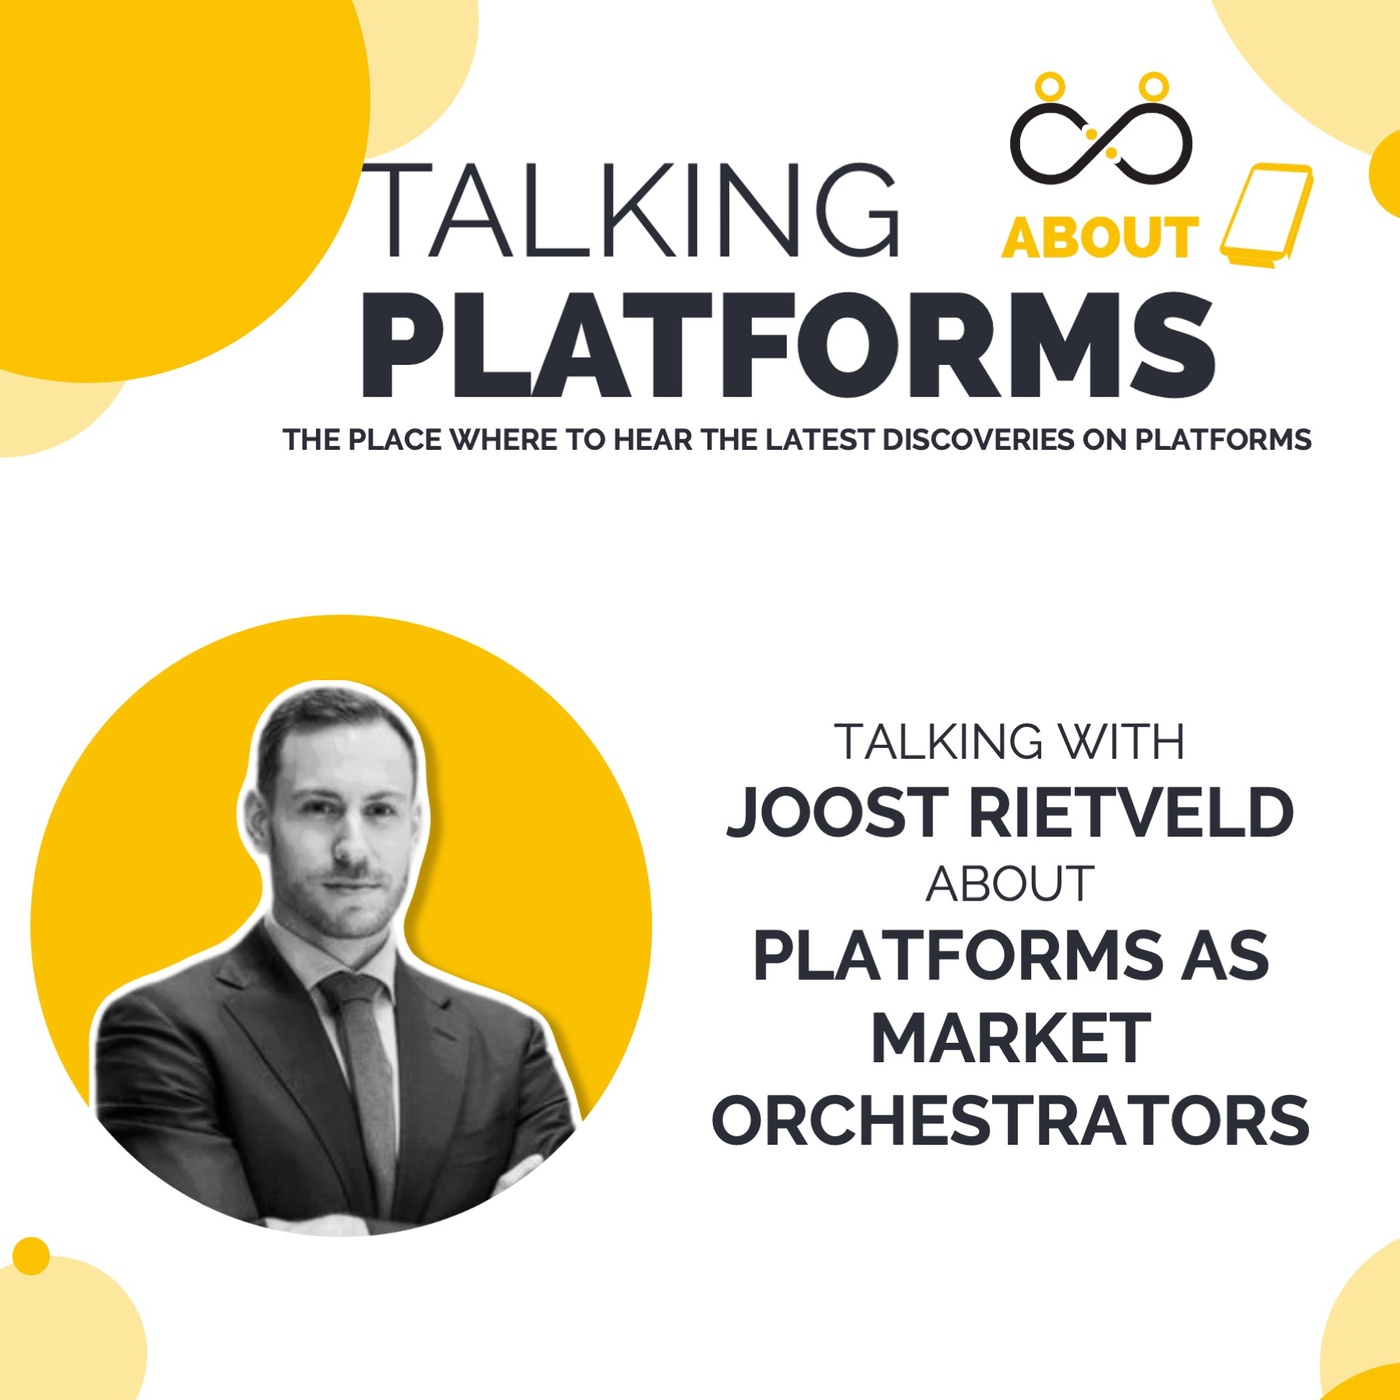 Platforms as market orchestrators with Joost Rietveld